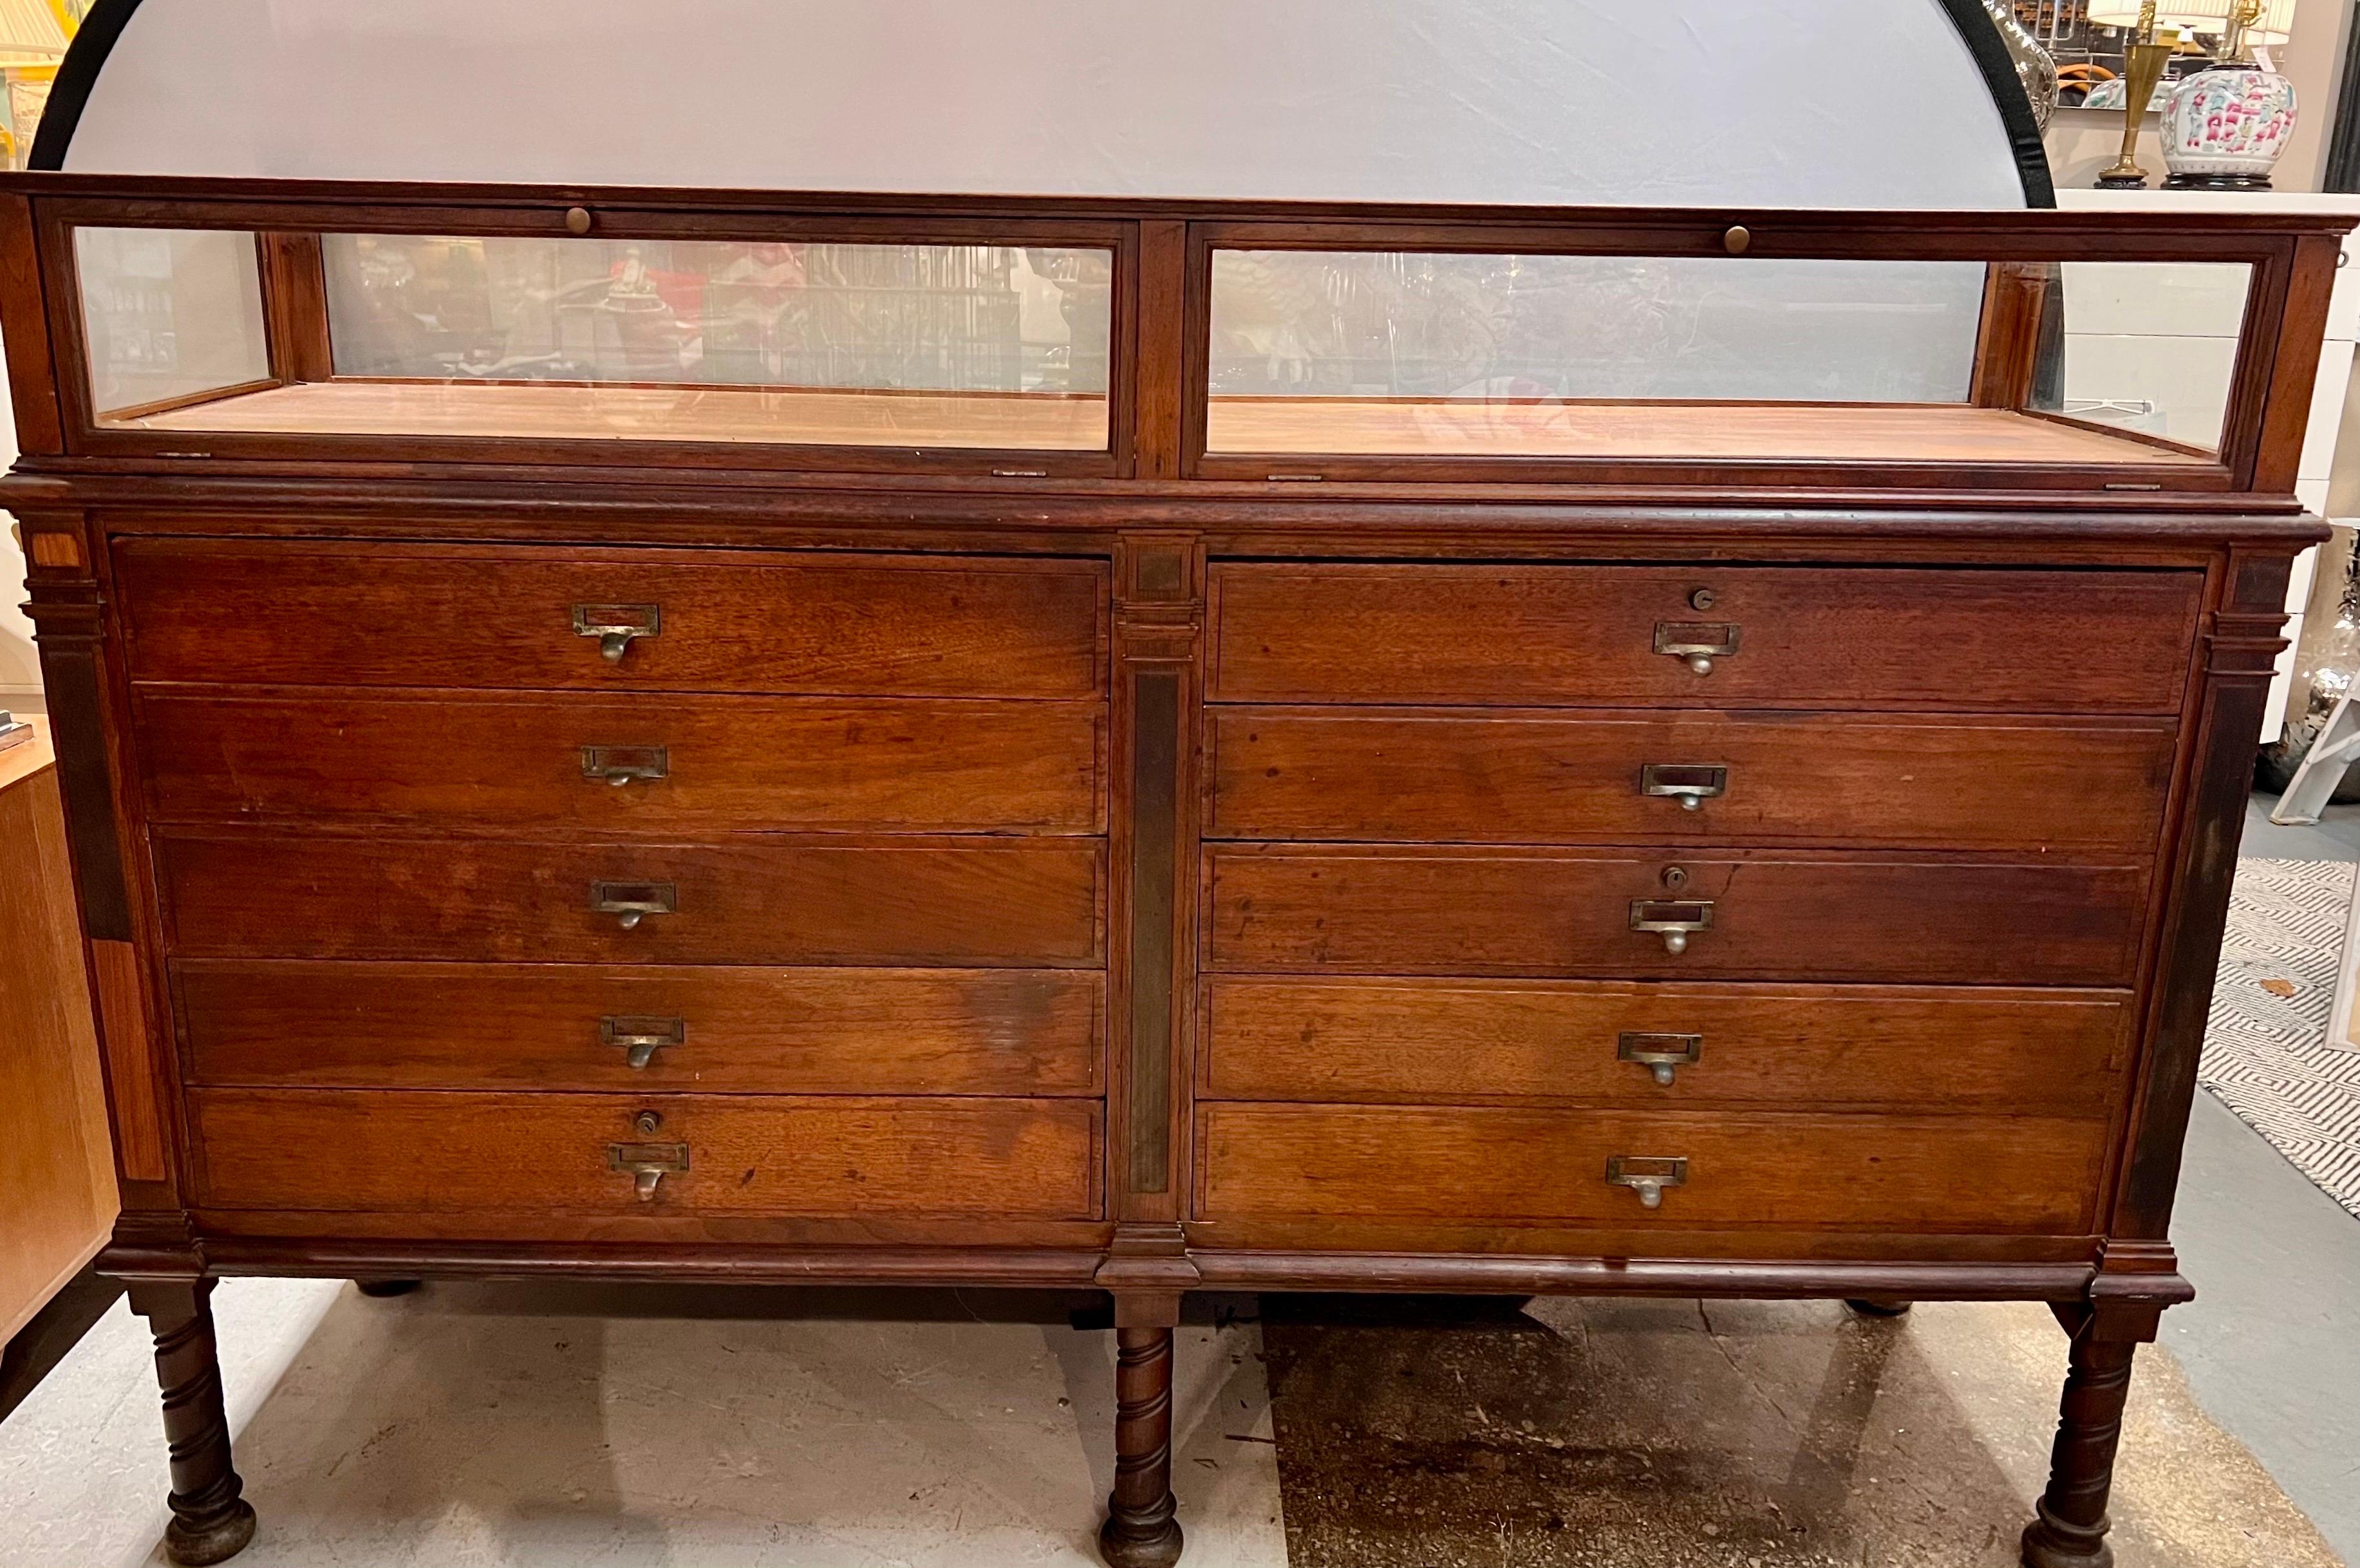 Beautiful rare antique mahogany display case vitrine with 2 display compartments on top that open in the front. There are 10 drawers, 5 on each side underneath glass doors. Back is also finished.  All original hardware.